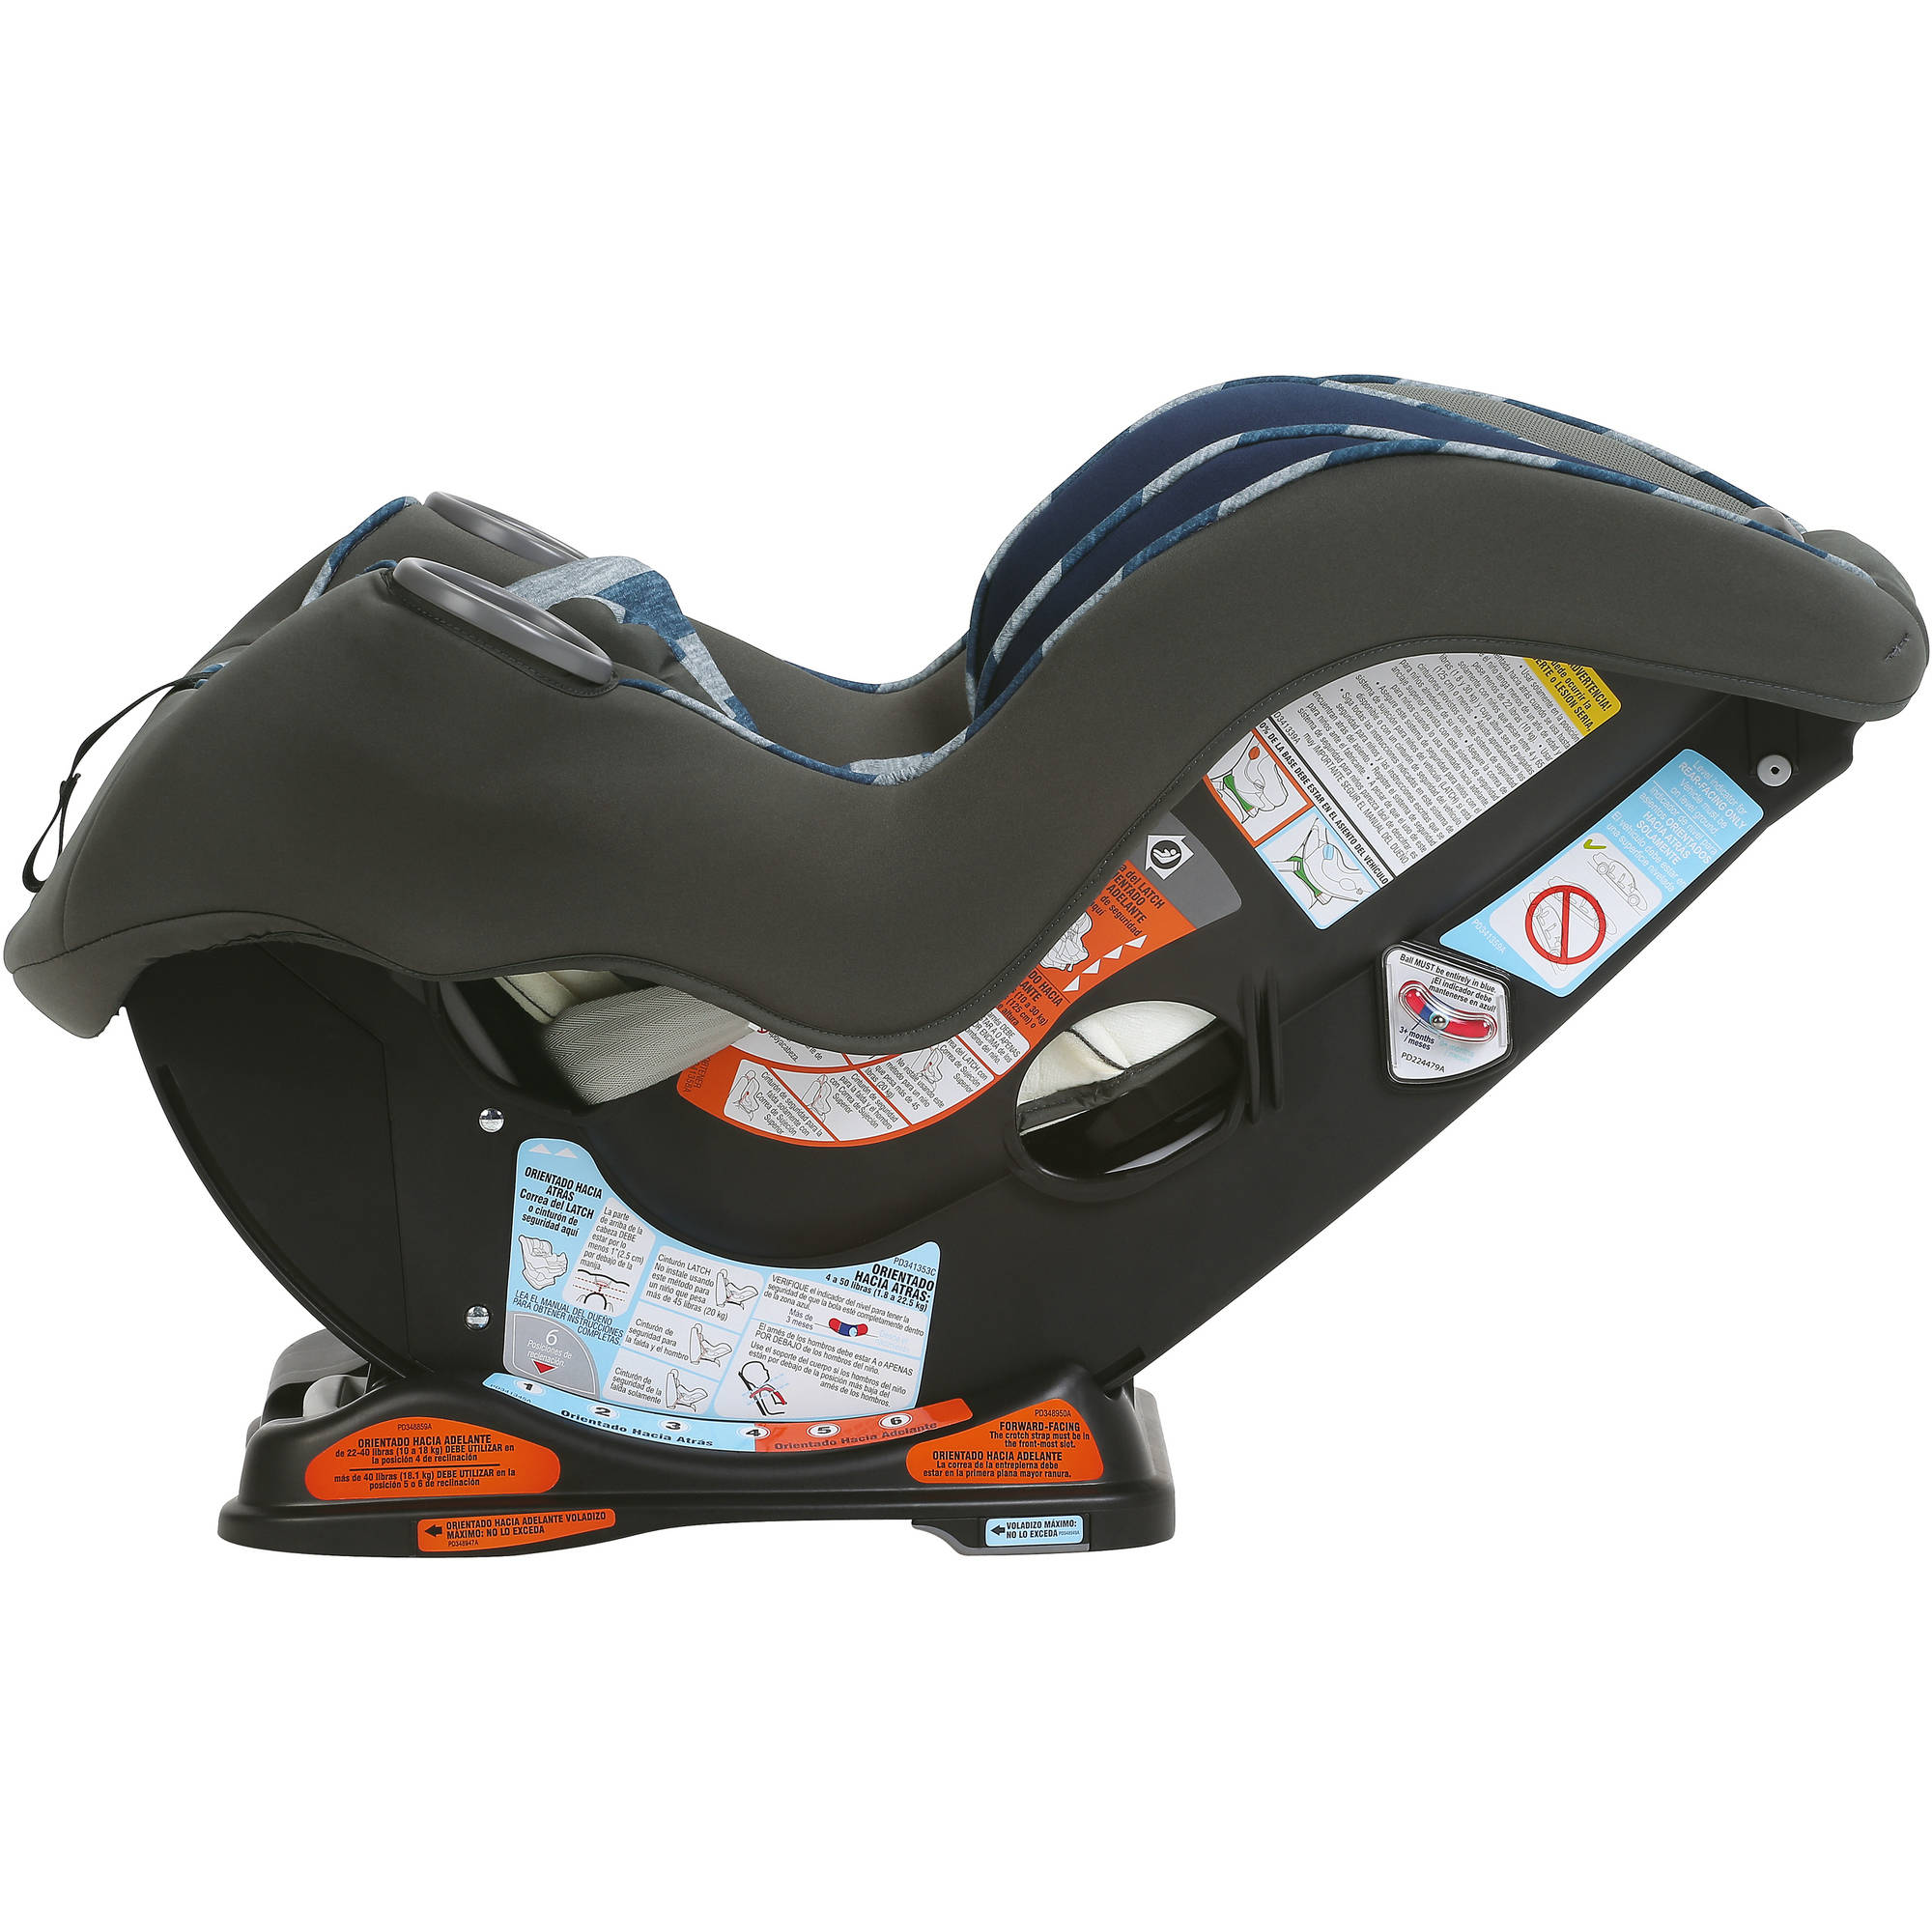 Graco Sequel 65 Convertible Car Seat with 6-Position Recline, Caden Navy - image 3 of 7